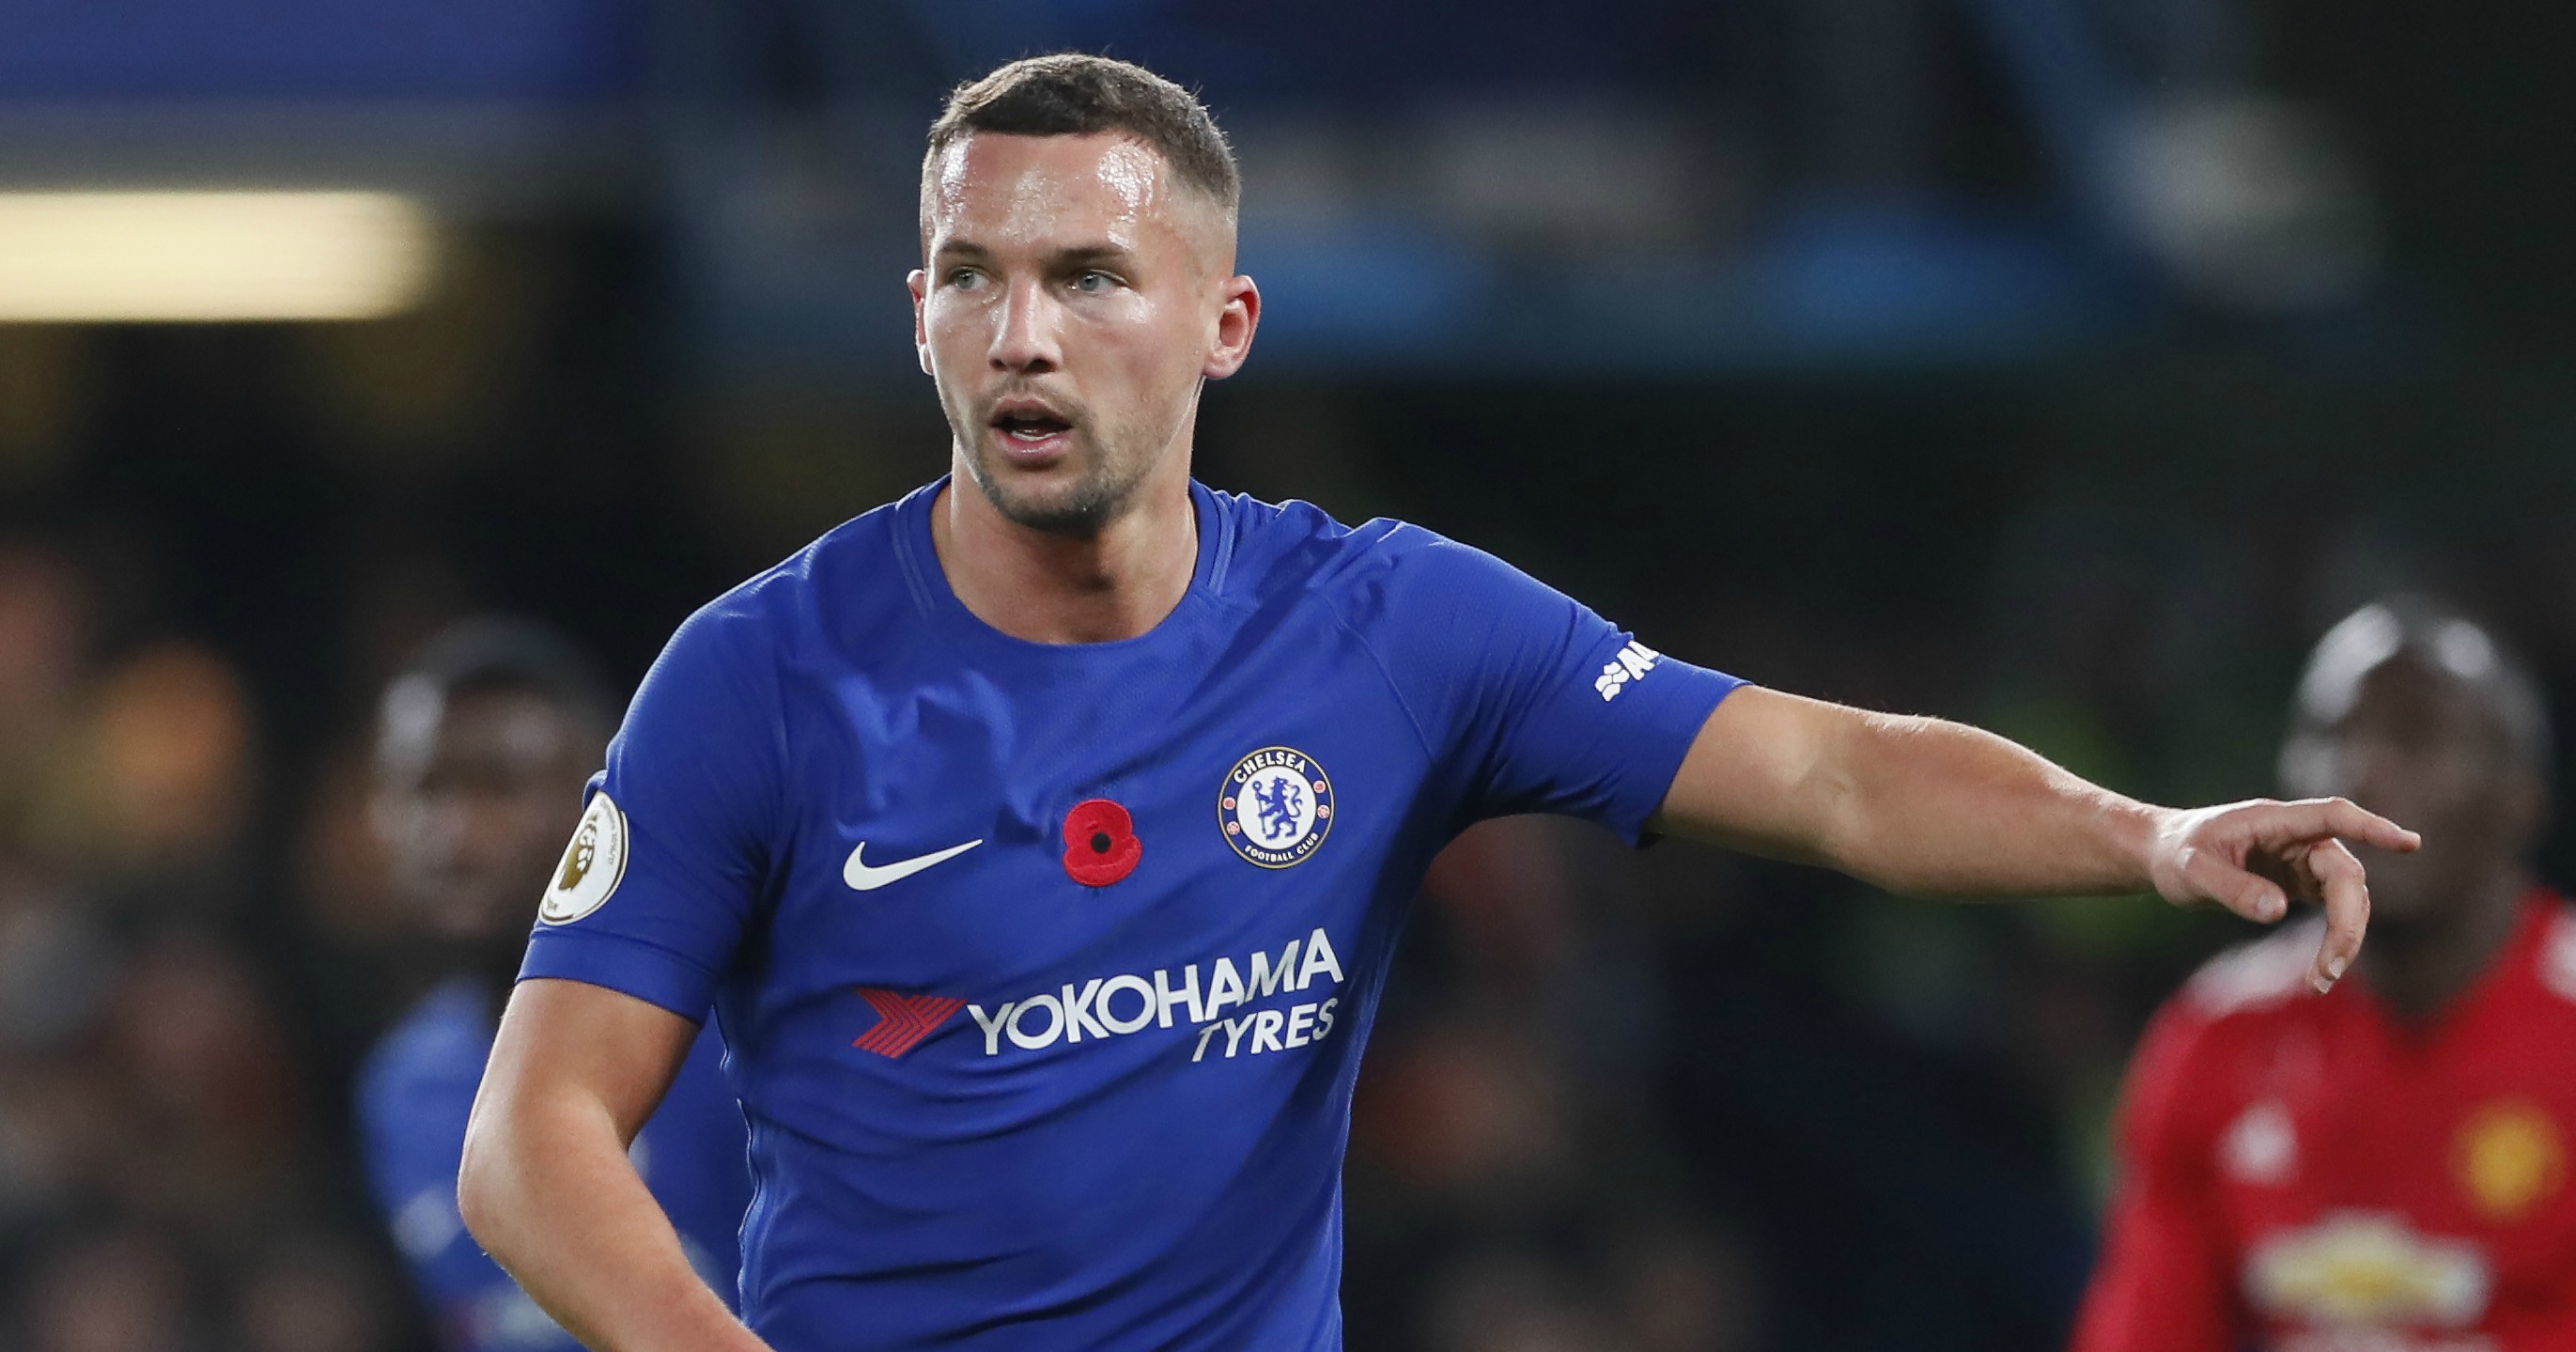 Club in talks with Chelsea to sign midfielder, could be late January transfer - Bóng Đá